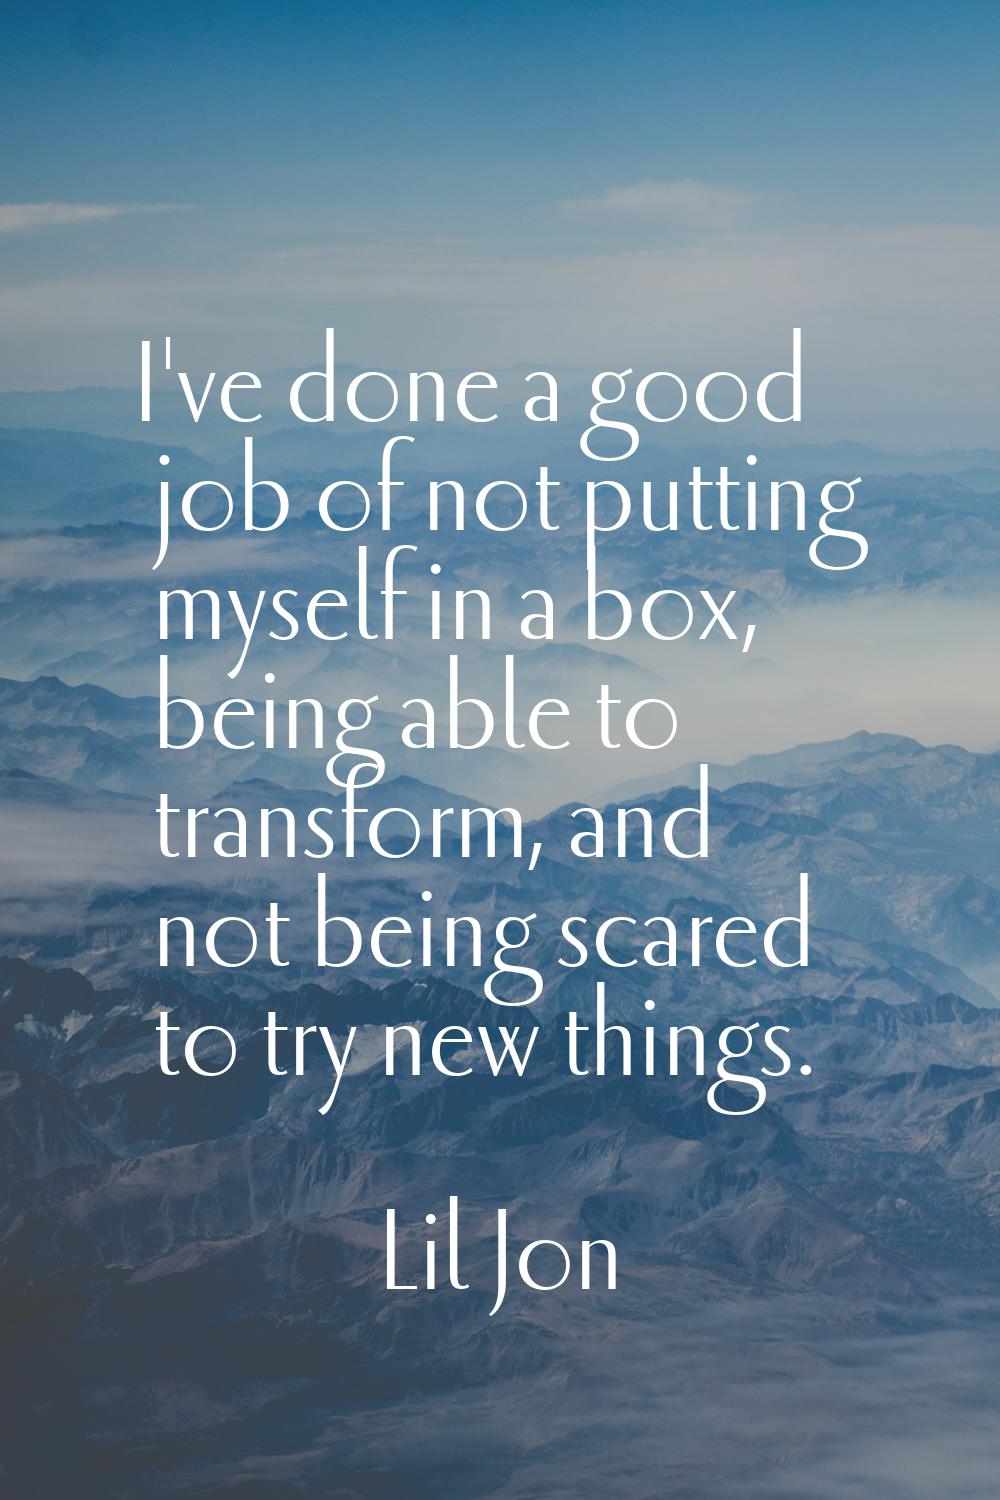 I've done a good job of not putting myself in a box, being able to transform, and not being scared 